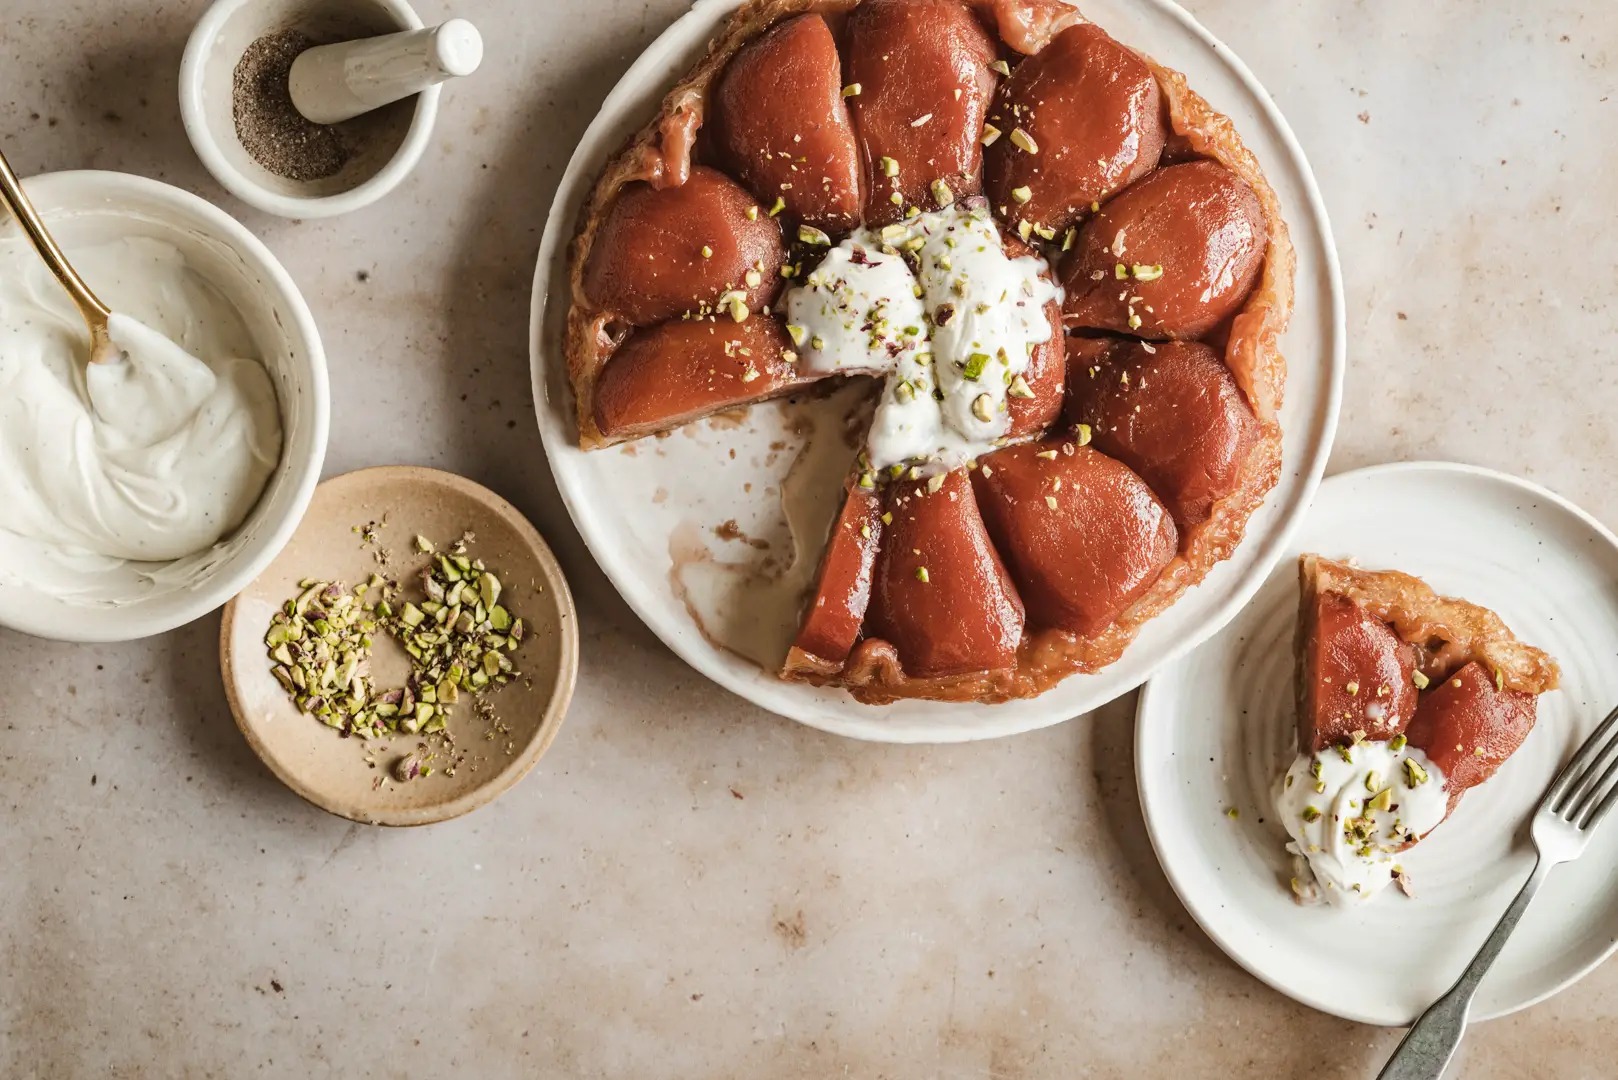 This quince tarte tatin topped with cardamom crème fraîche & pistachios is the ultimate way to display the glory of this ancient fruit